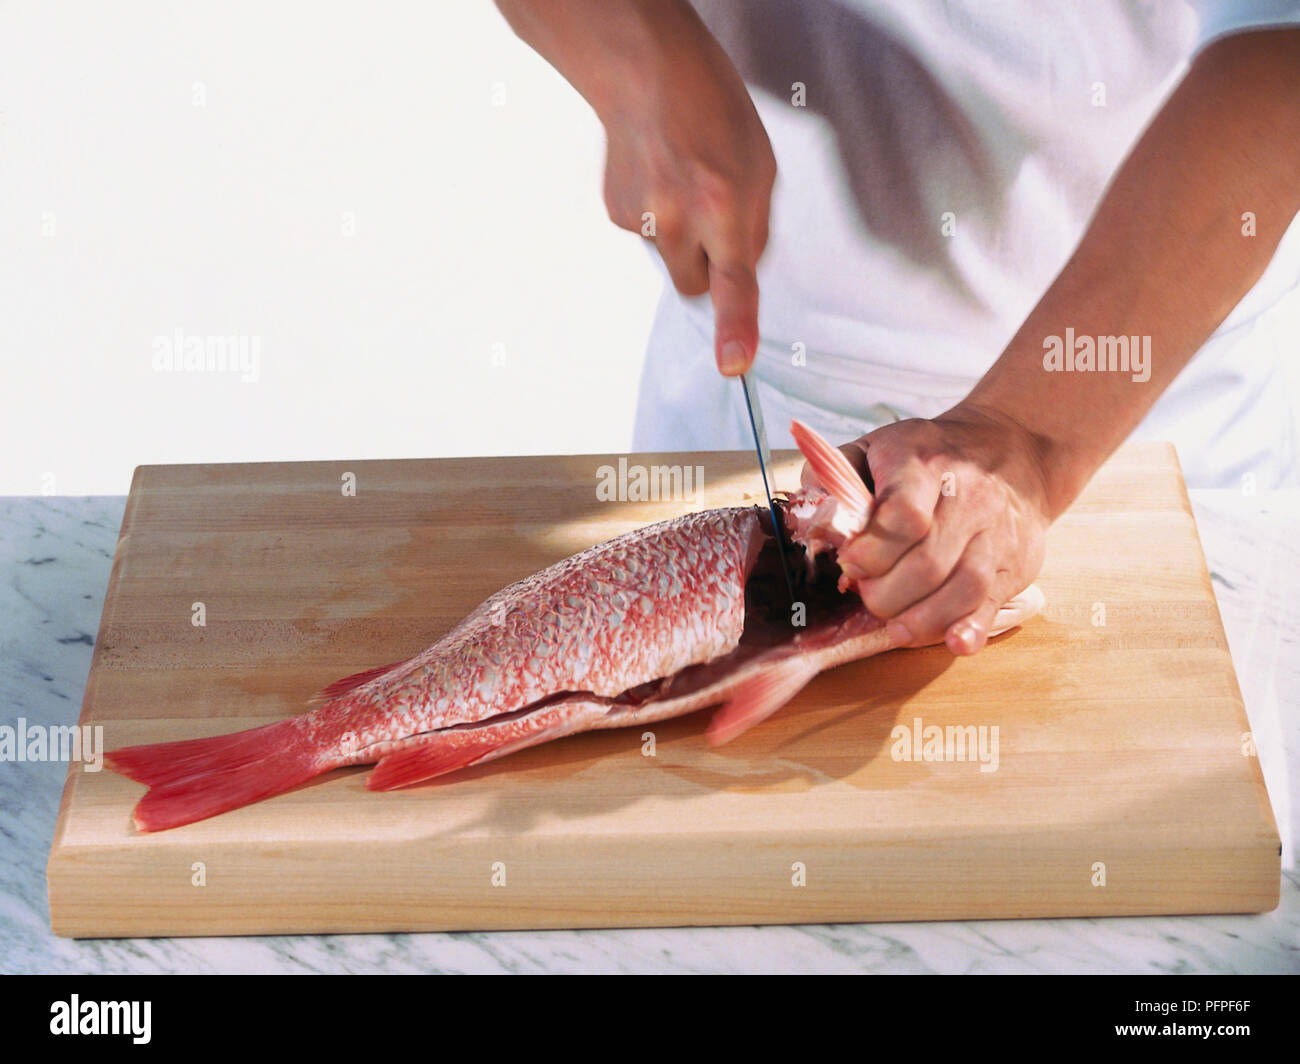 Chef using sharp knife to cut through body of Red Snapper